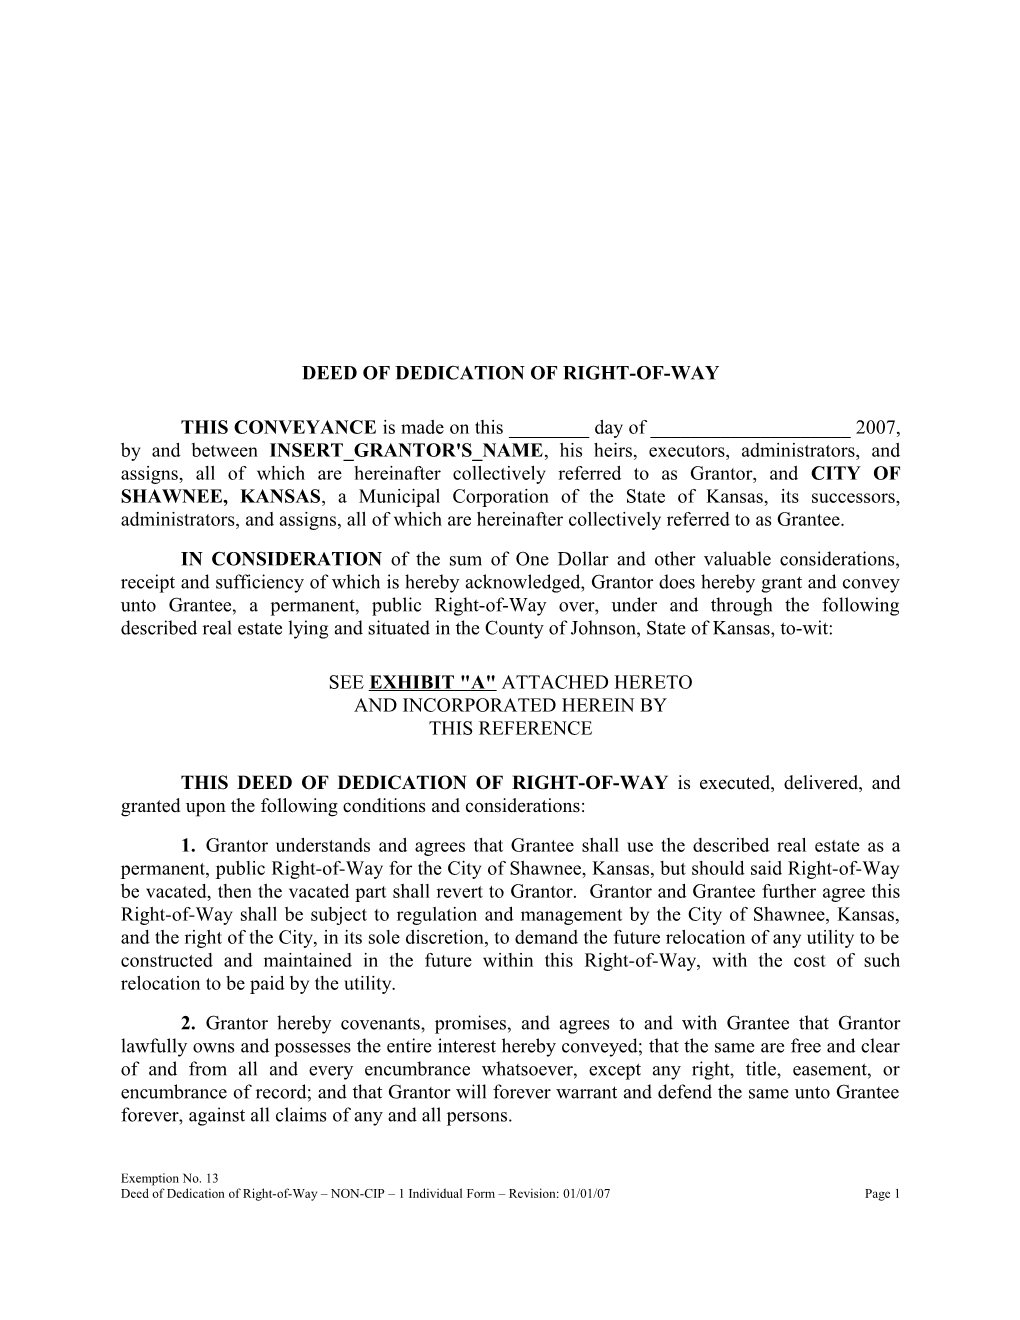 Deed of Dedication of Right-Of-Way - NON-CIP - 1 Individual Form